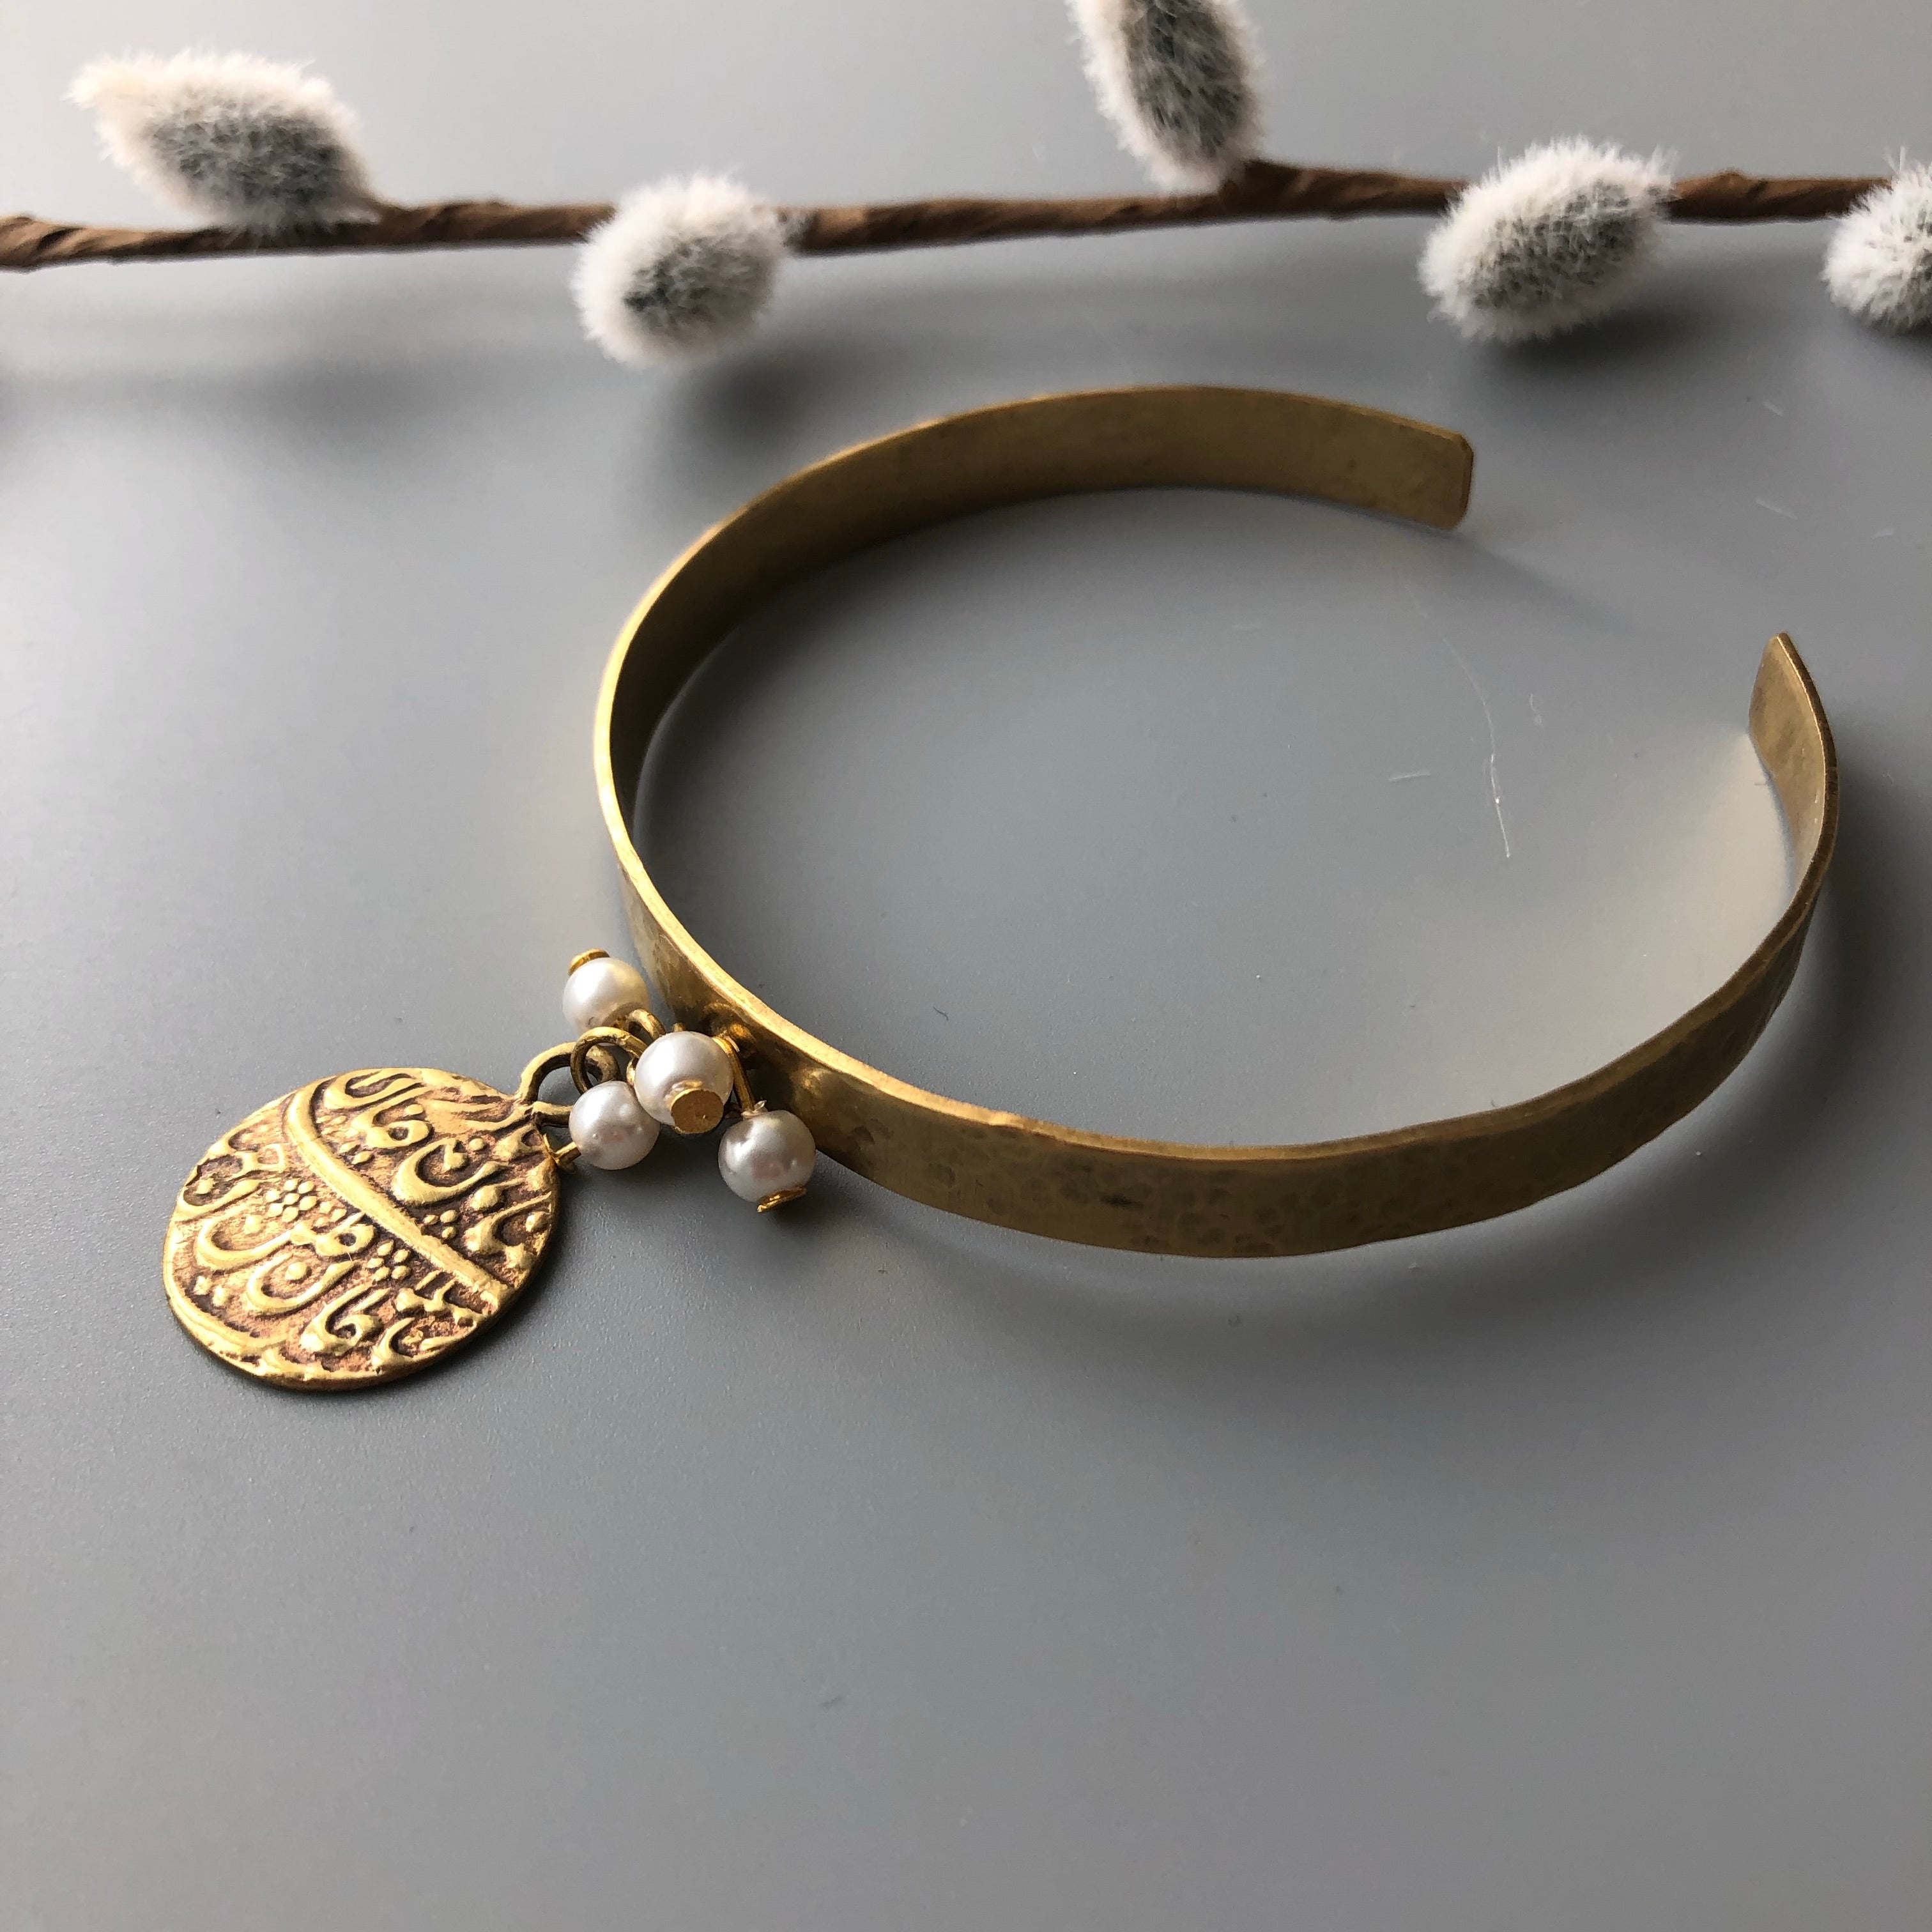 Persian Bracelets-Persian Brass Bracelet with Coin Charm and Pearl: Persian Jewelry-AFRA ART GALLERY